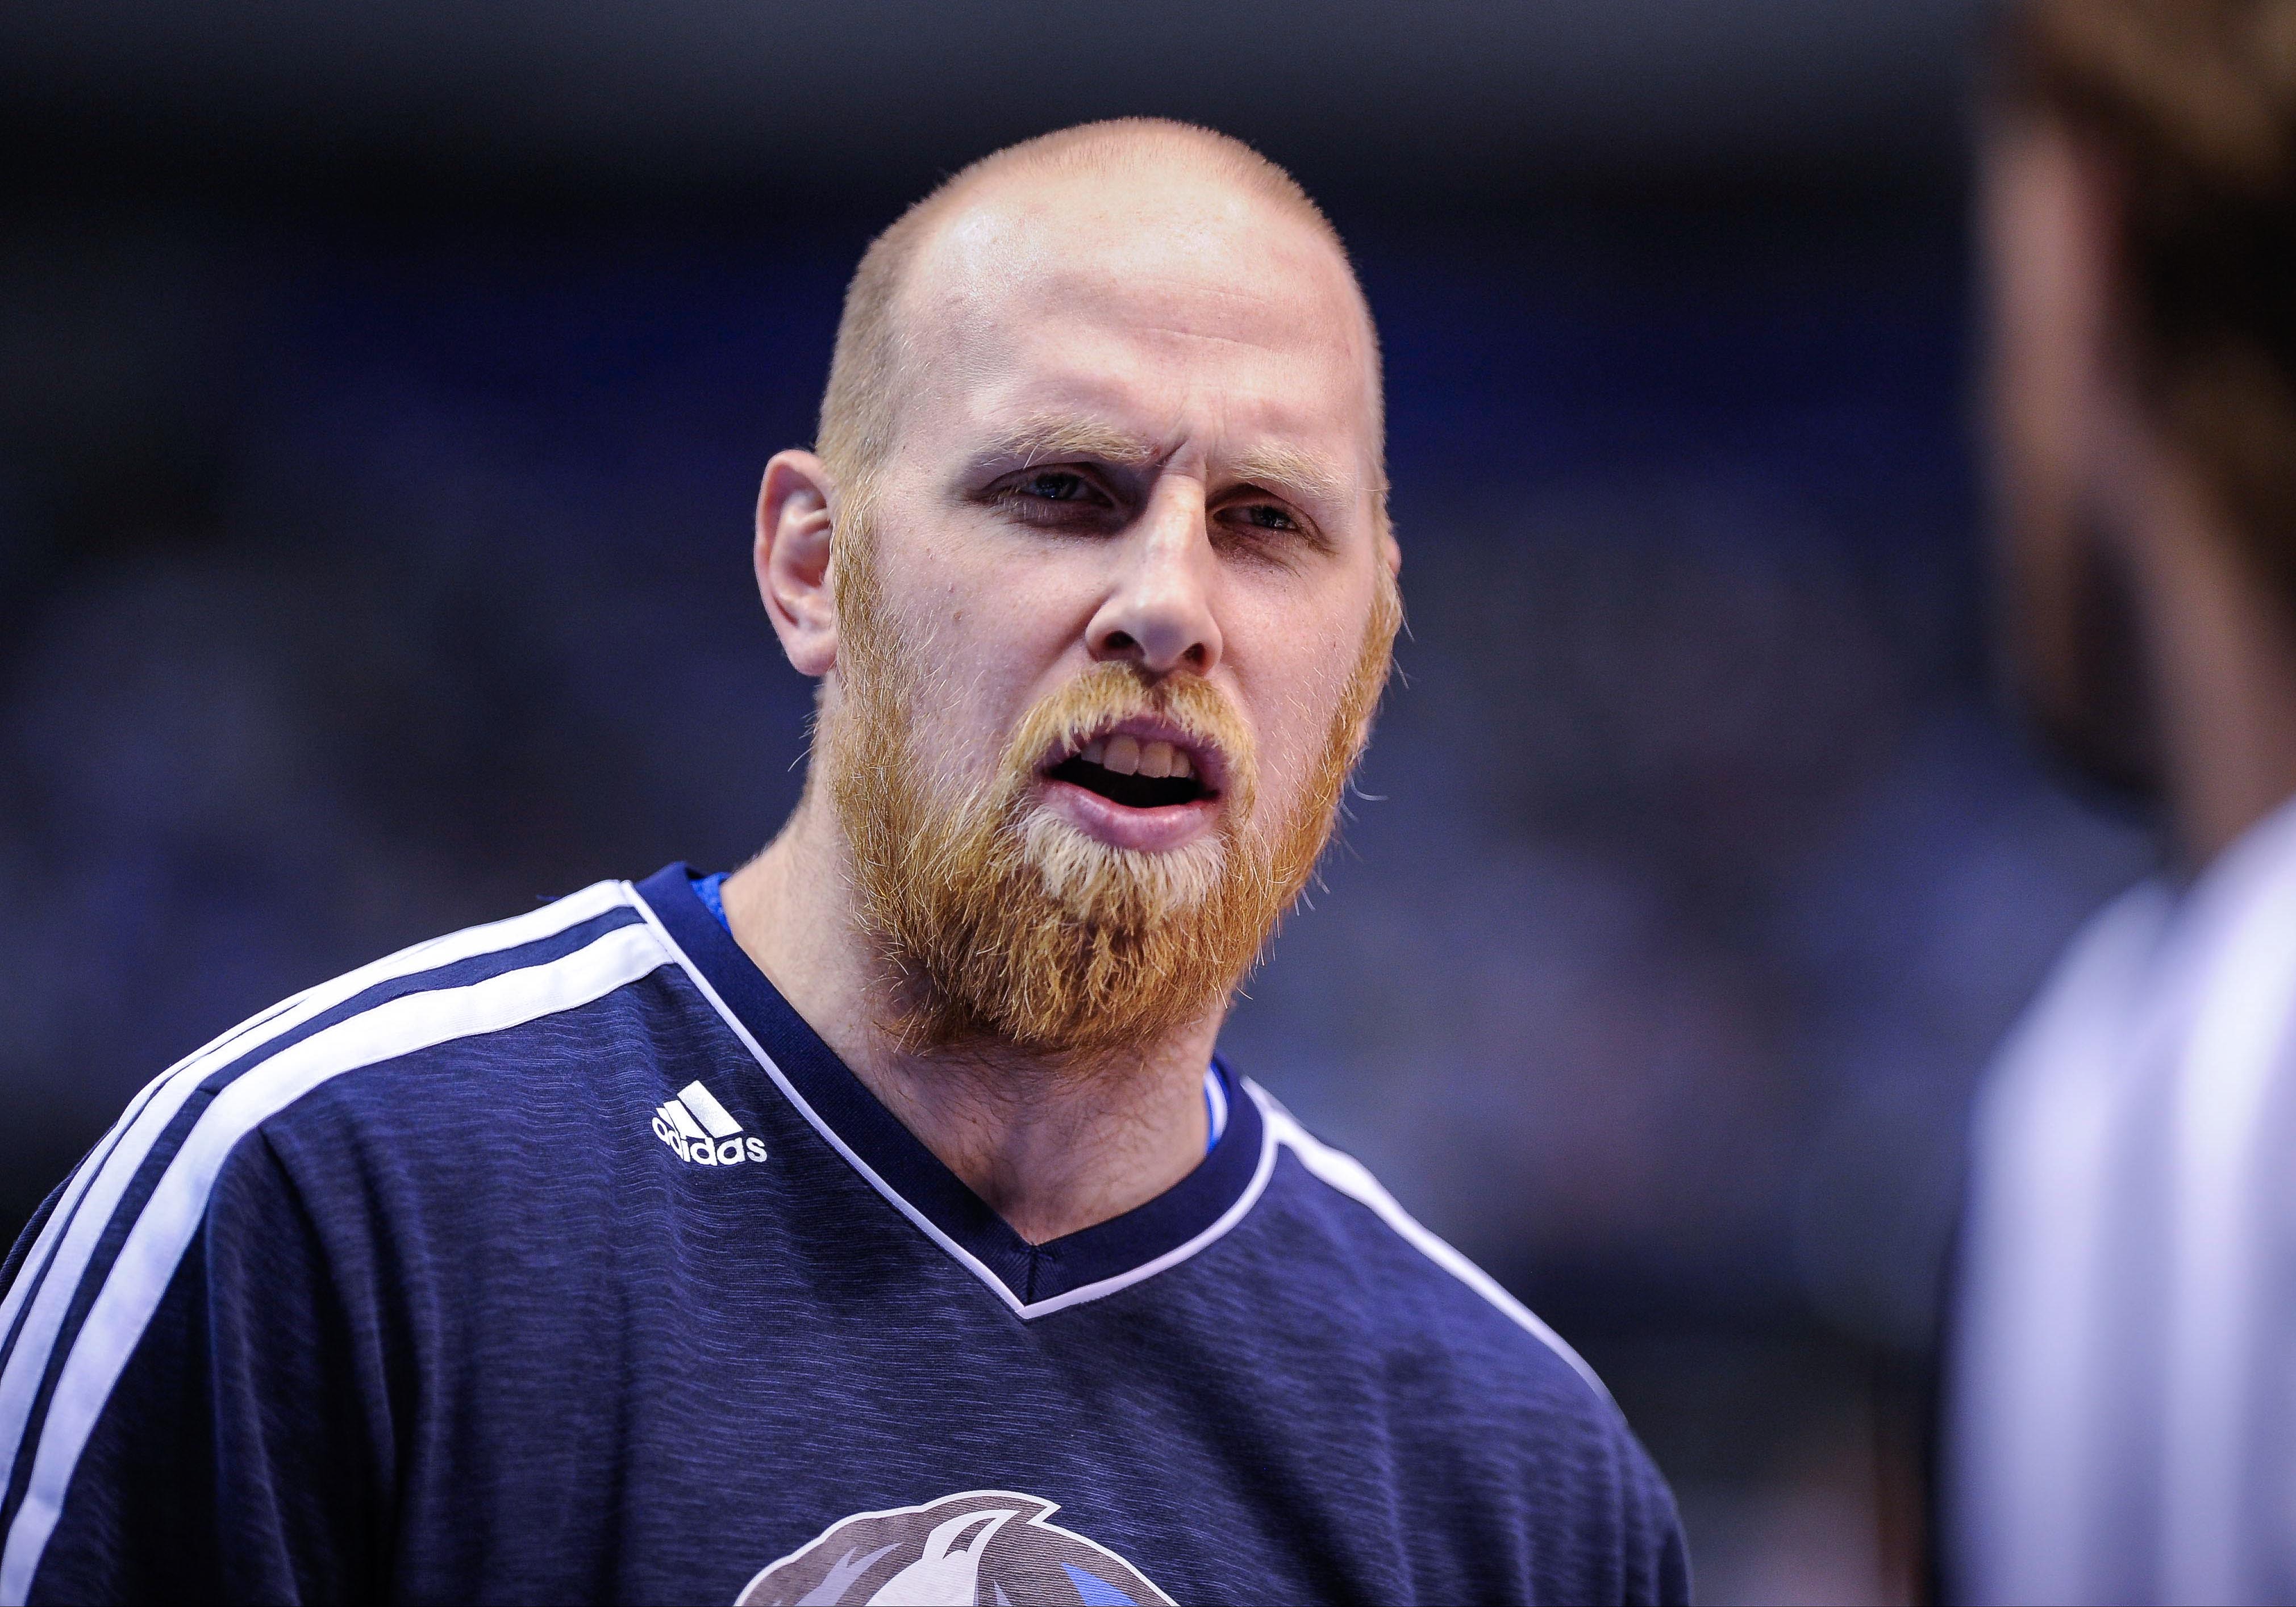 Chris Kaman is already sidelined with injury after the first practice of  the season - Mavs Moneyball